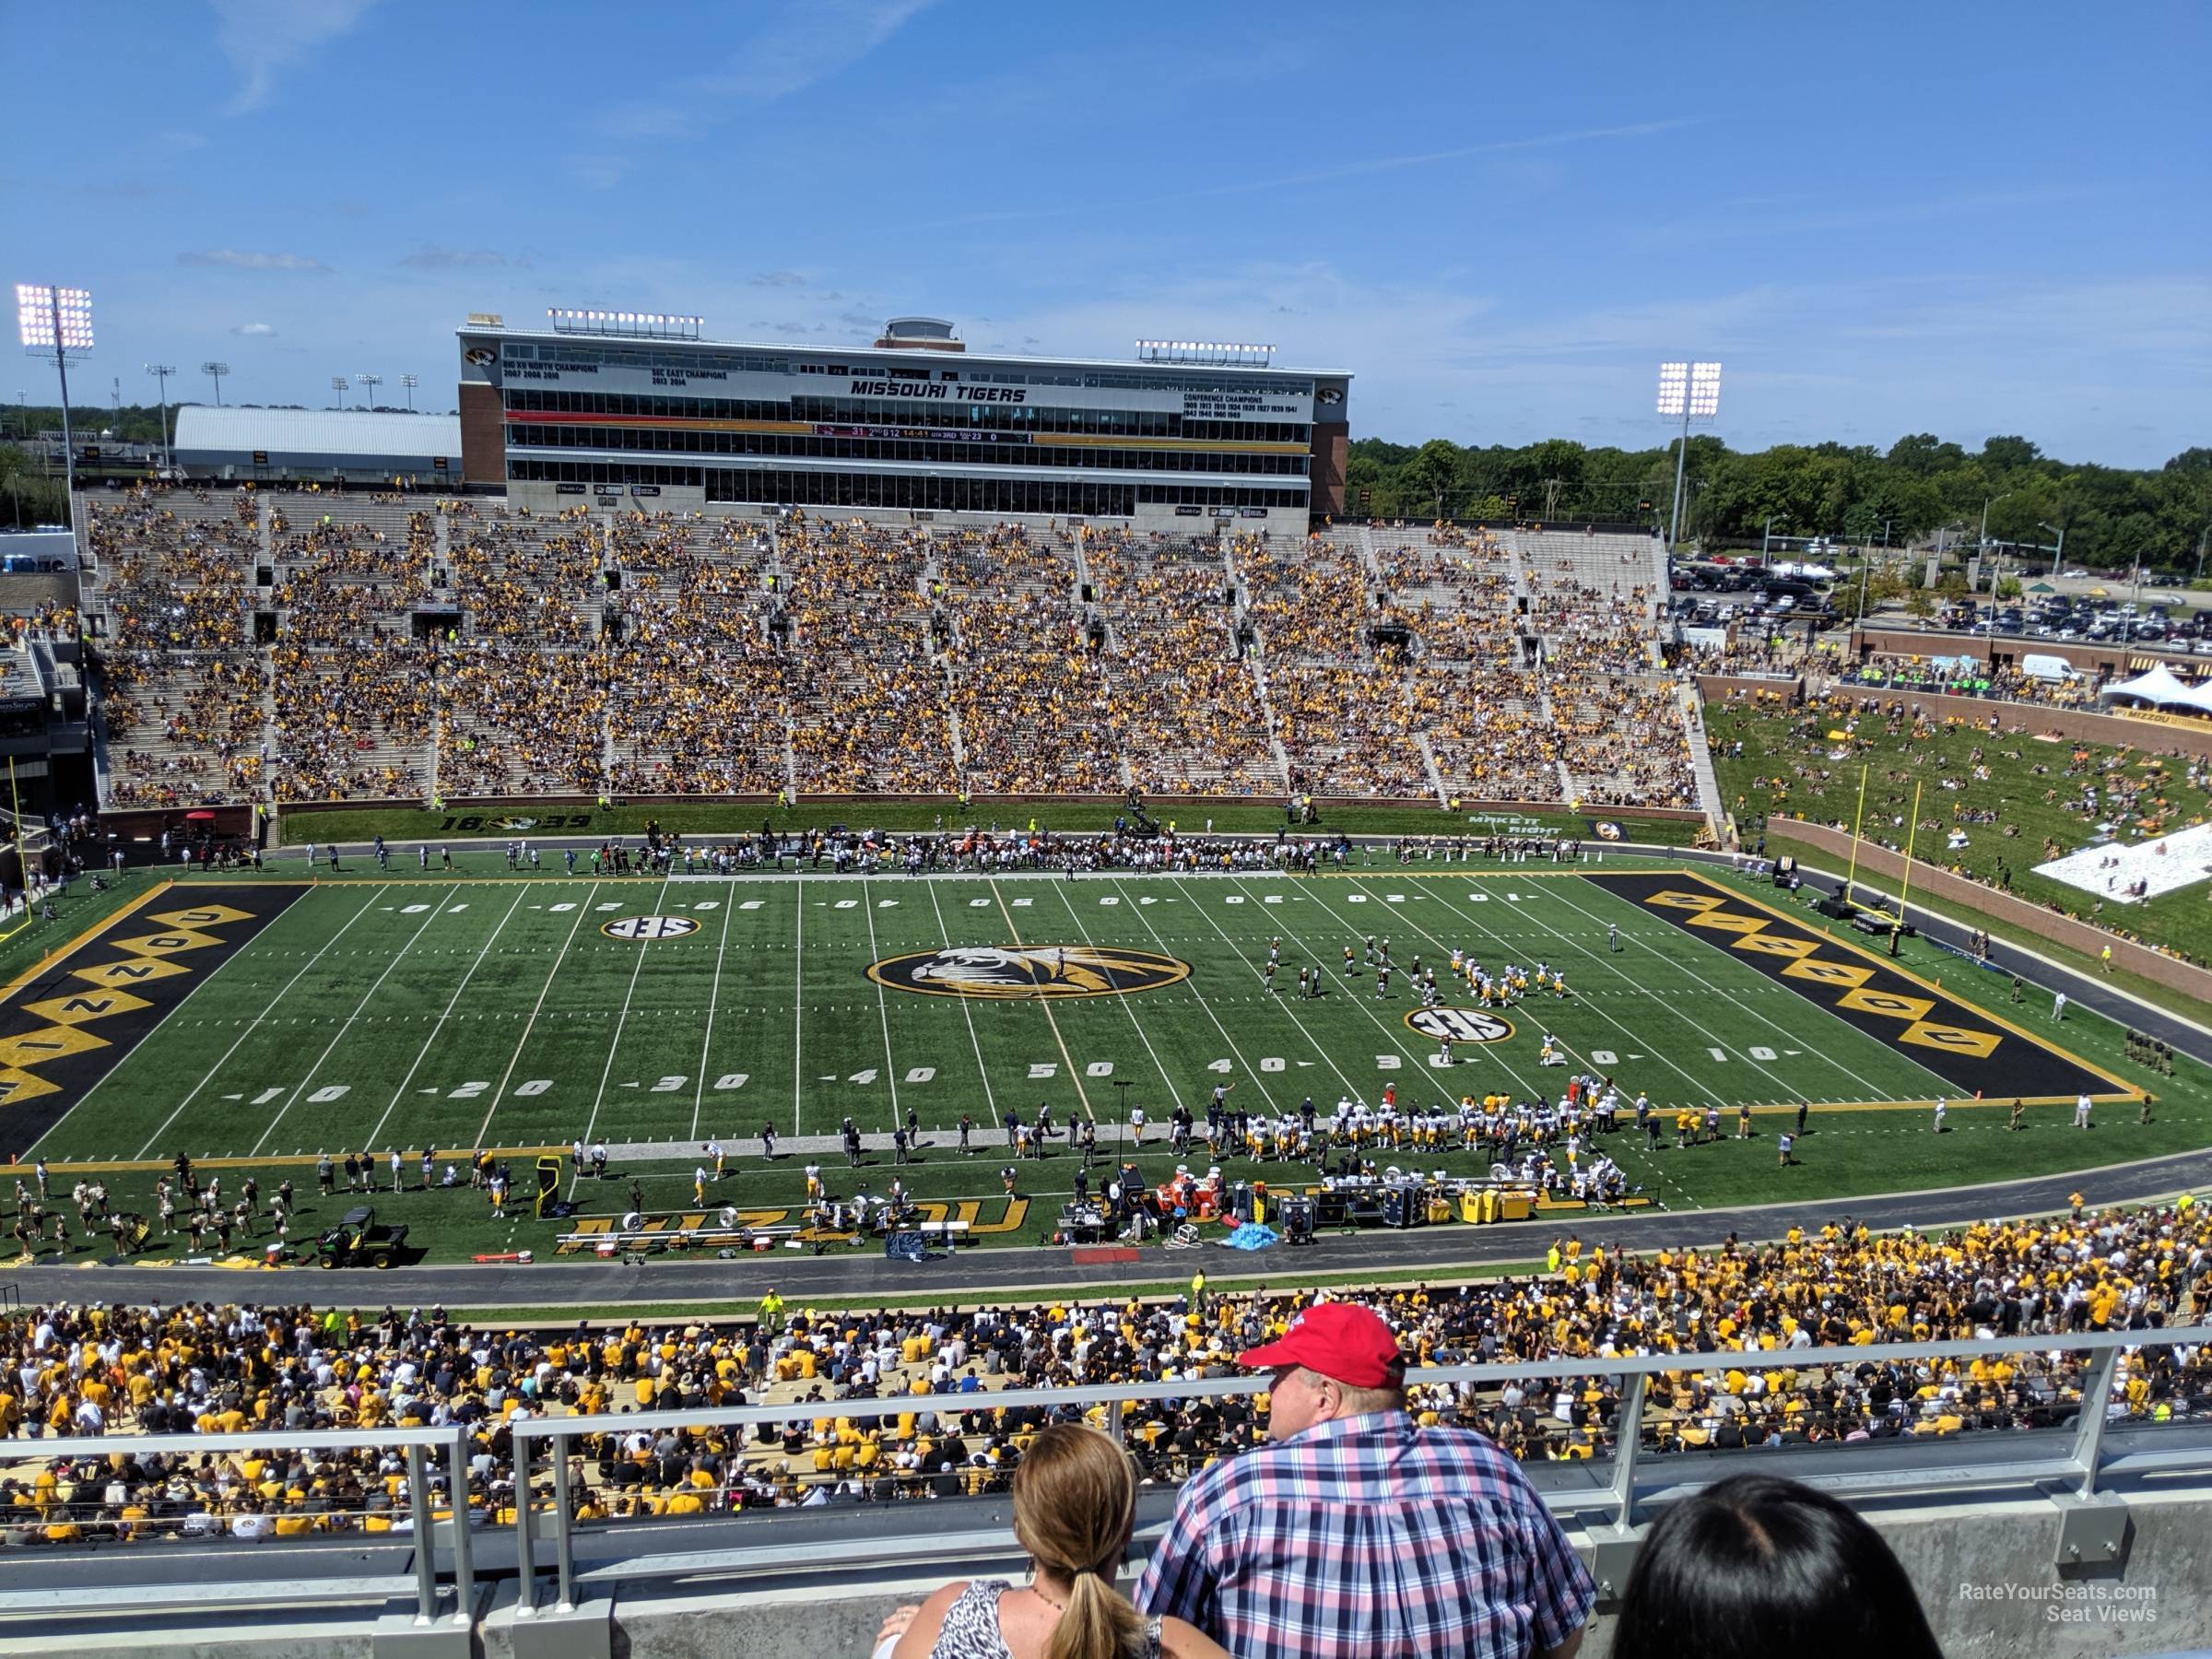 section 307, row 4 seat view  - faurot field